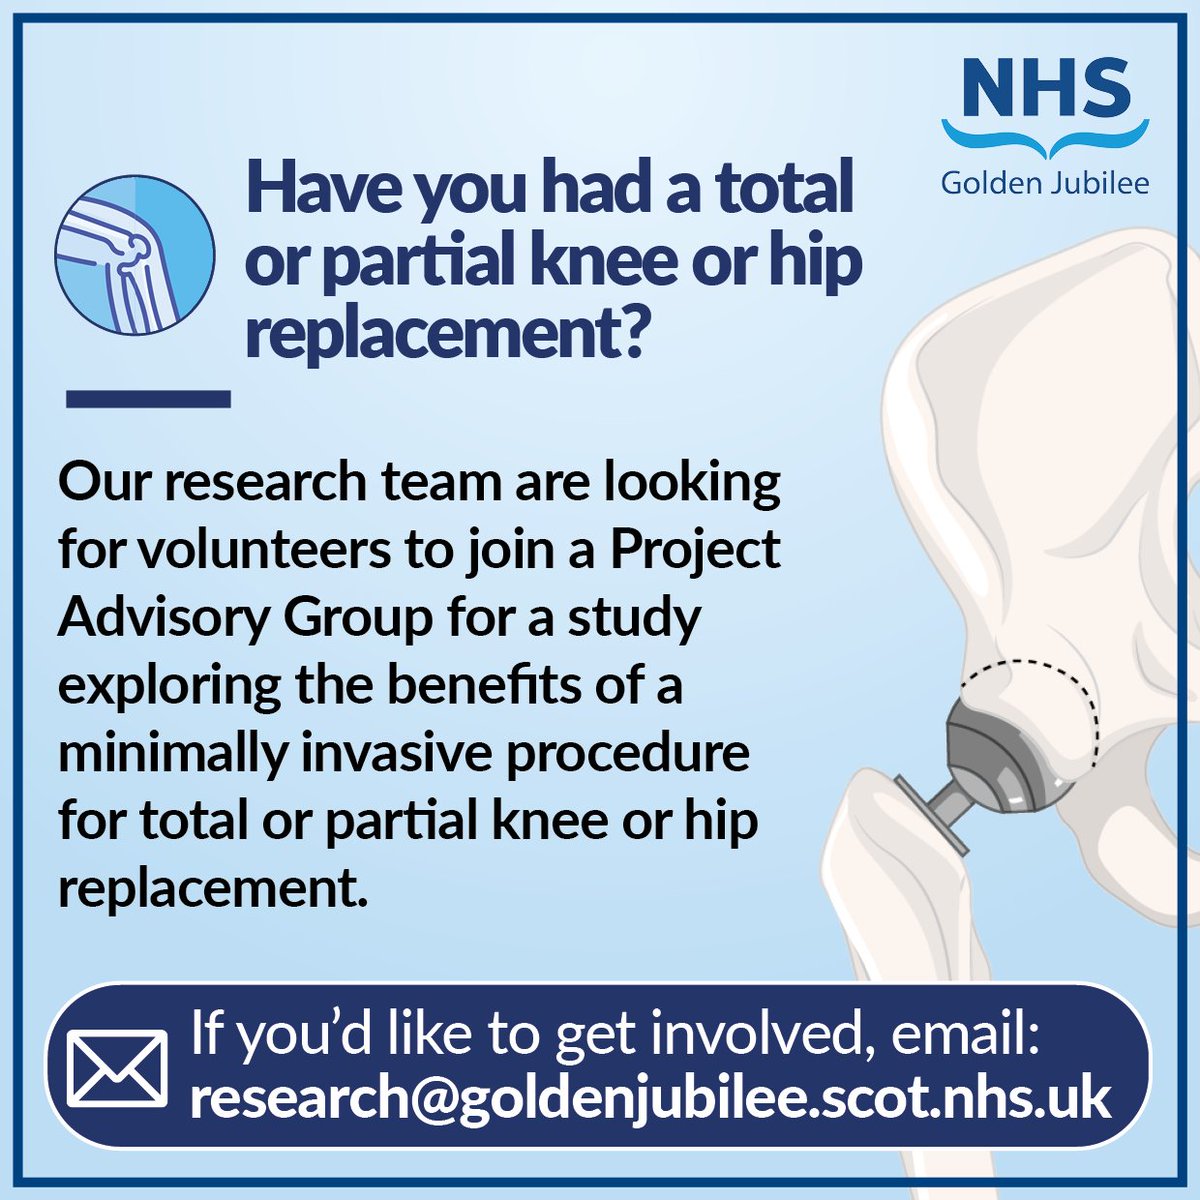 📣 Have you had a total or partial knee or hip replacement? Our Research team needs you! By working with our team, you will have the opportunity to contribute to the future of patient care. 📧 Contact research@goldenjubilee.scot.nhs.uk for more information.